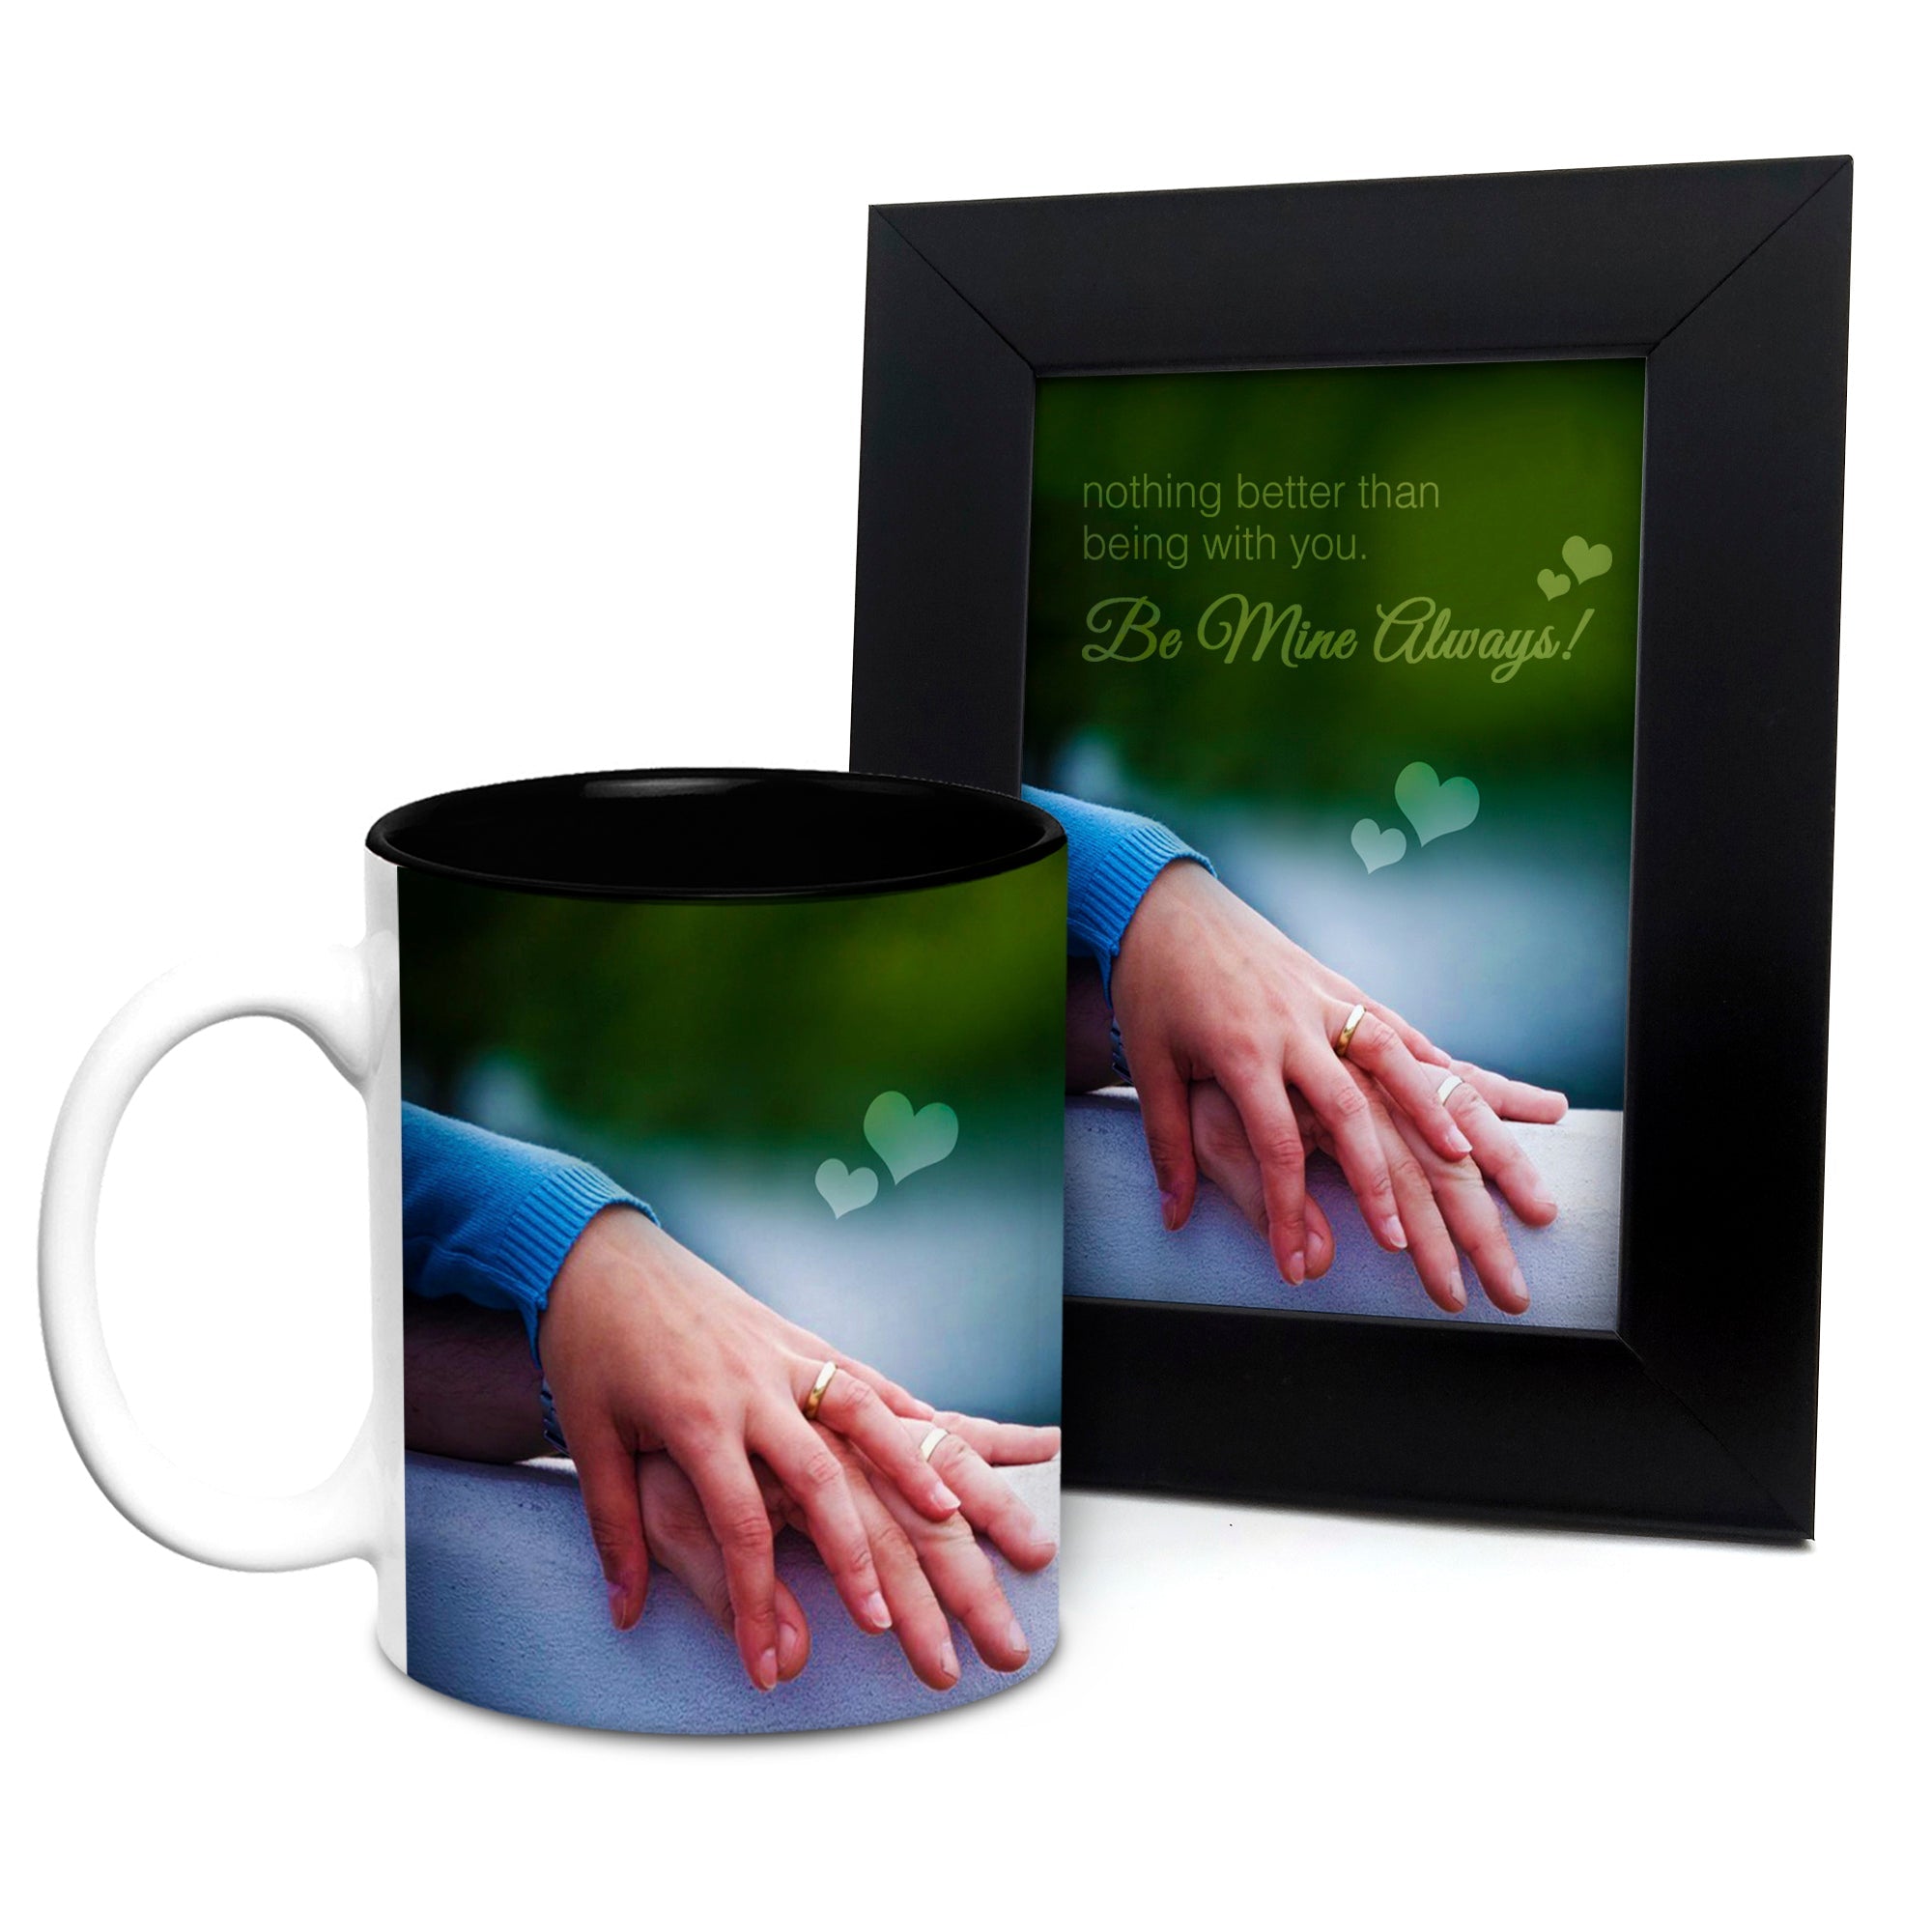 Nothing better than being with you Mug with Photo Frame